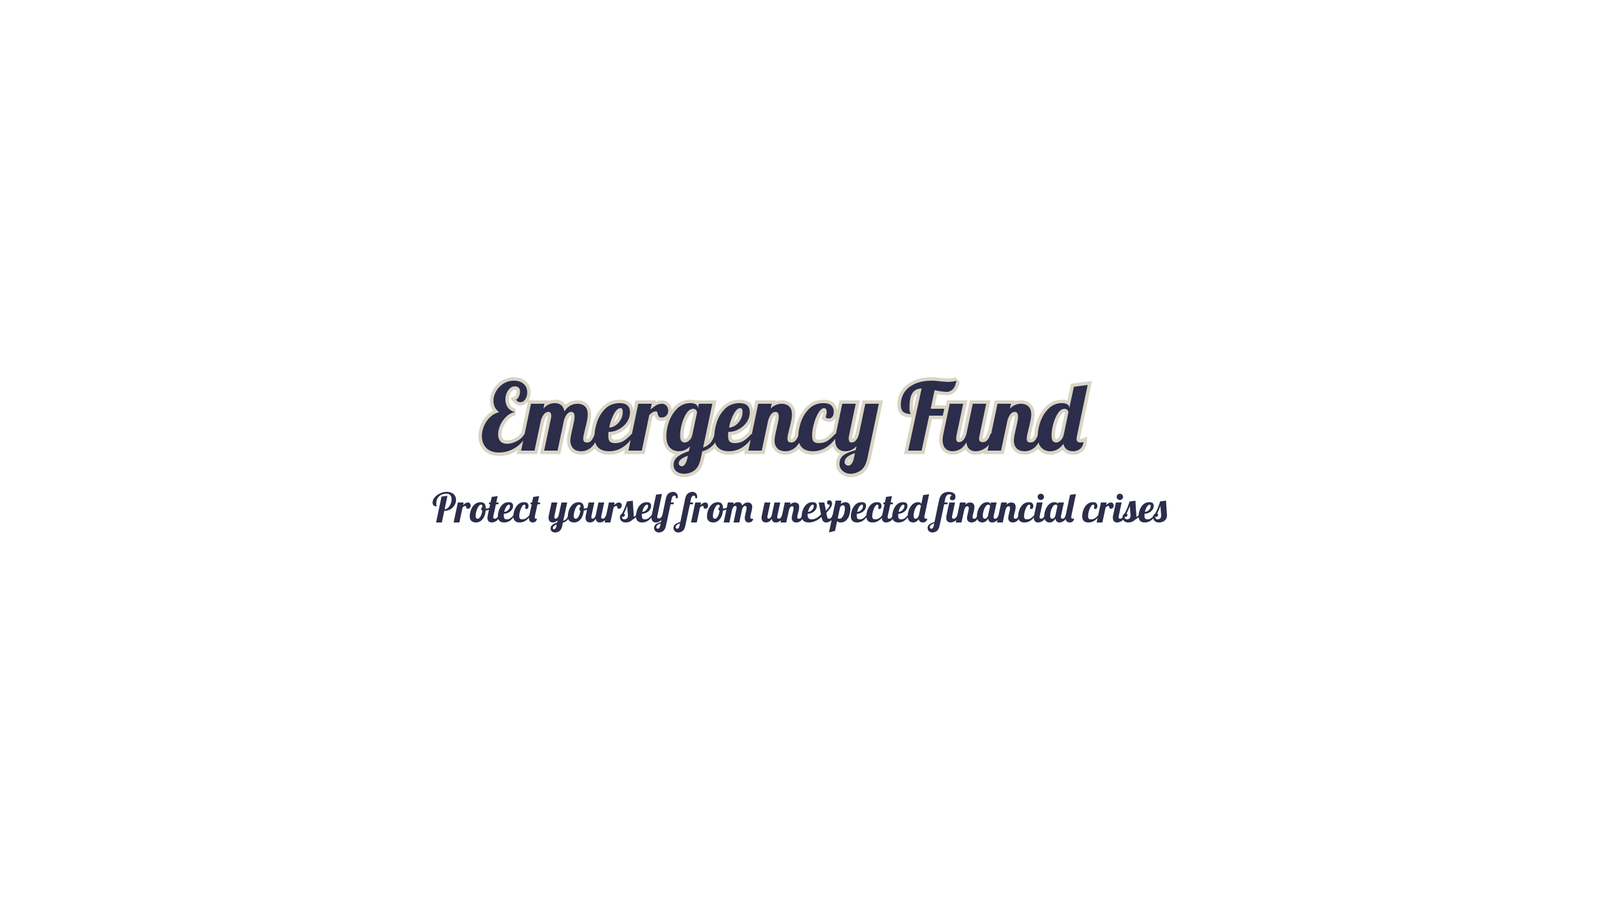 Emergency Fund: Why Is It Life-Saving?